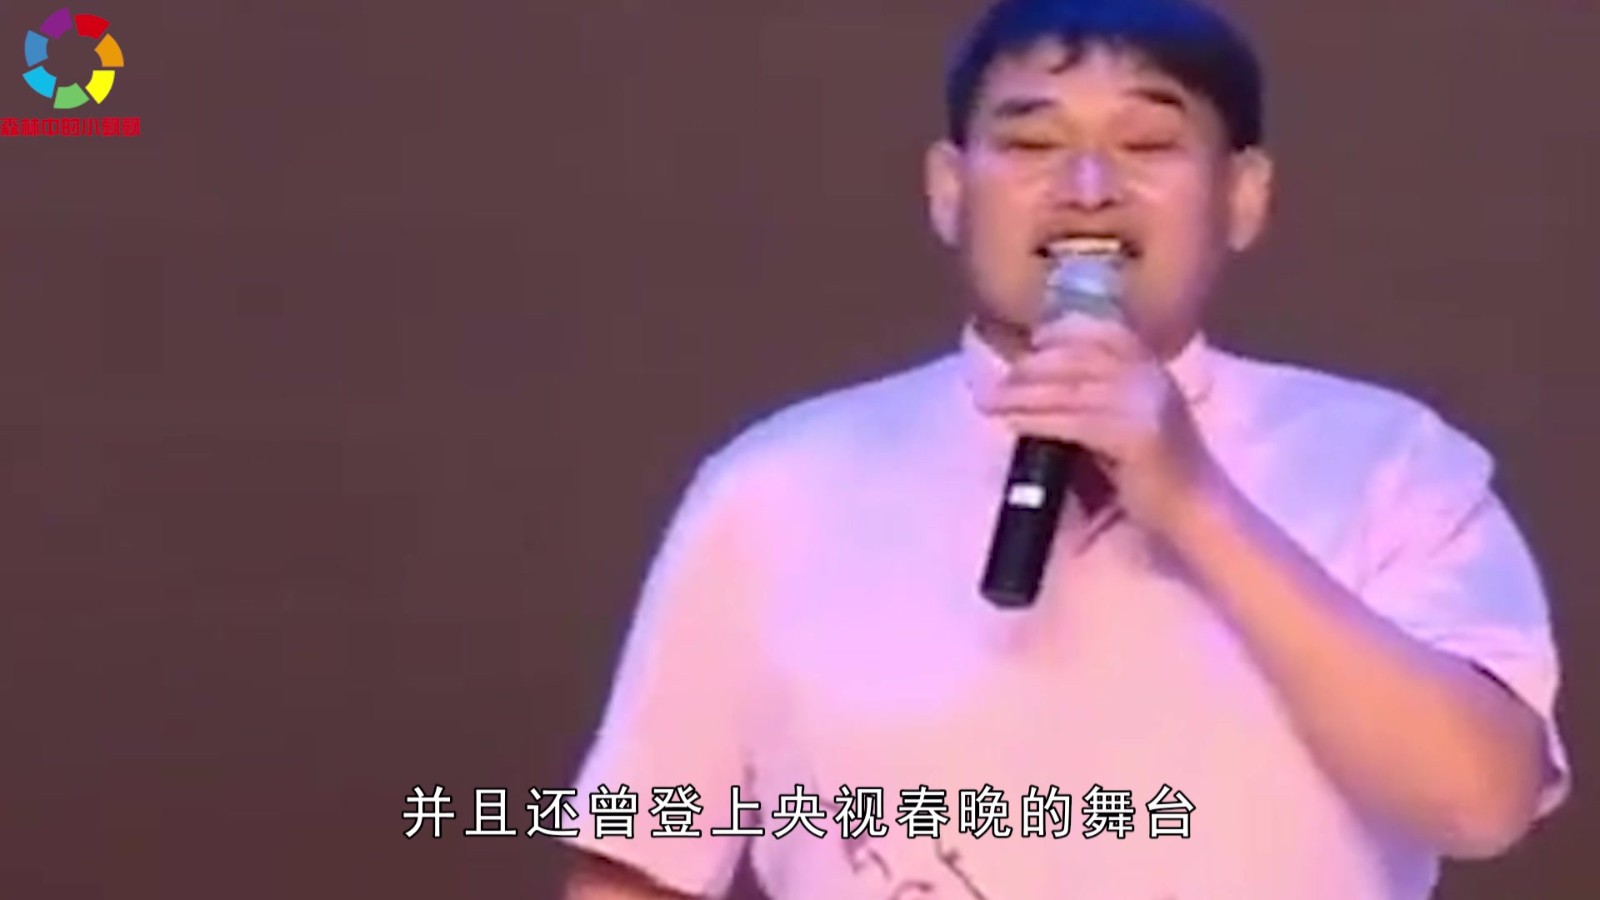 "Big Brother" meets female fans to add Weixin, but takes out his mobile phone and silences the other party.